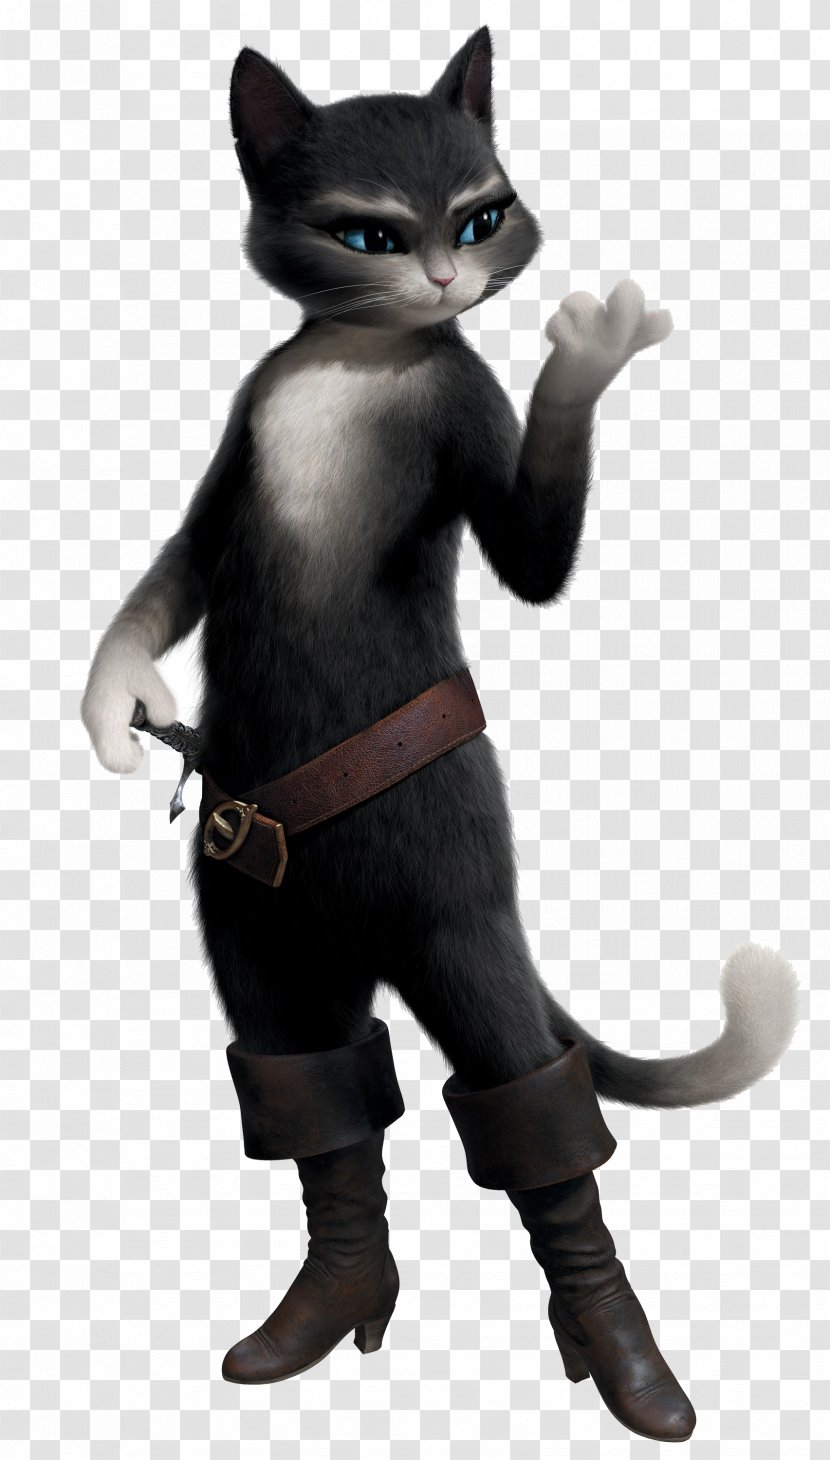 Donkey Kitty Softpaws Cat Adaptations Of Puss In Boots DreamWorks - Salma Hayek - Photos Transparent PNG